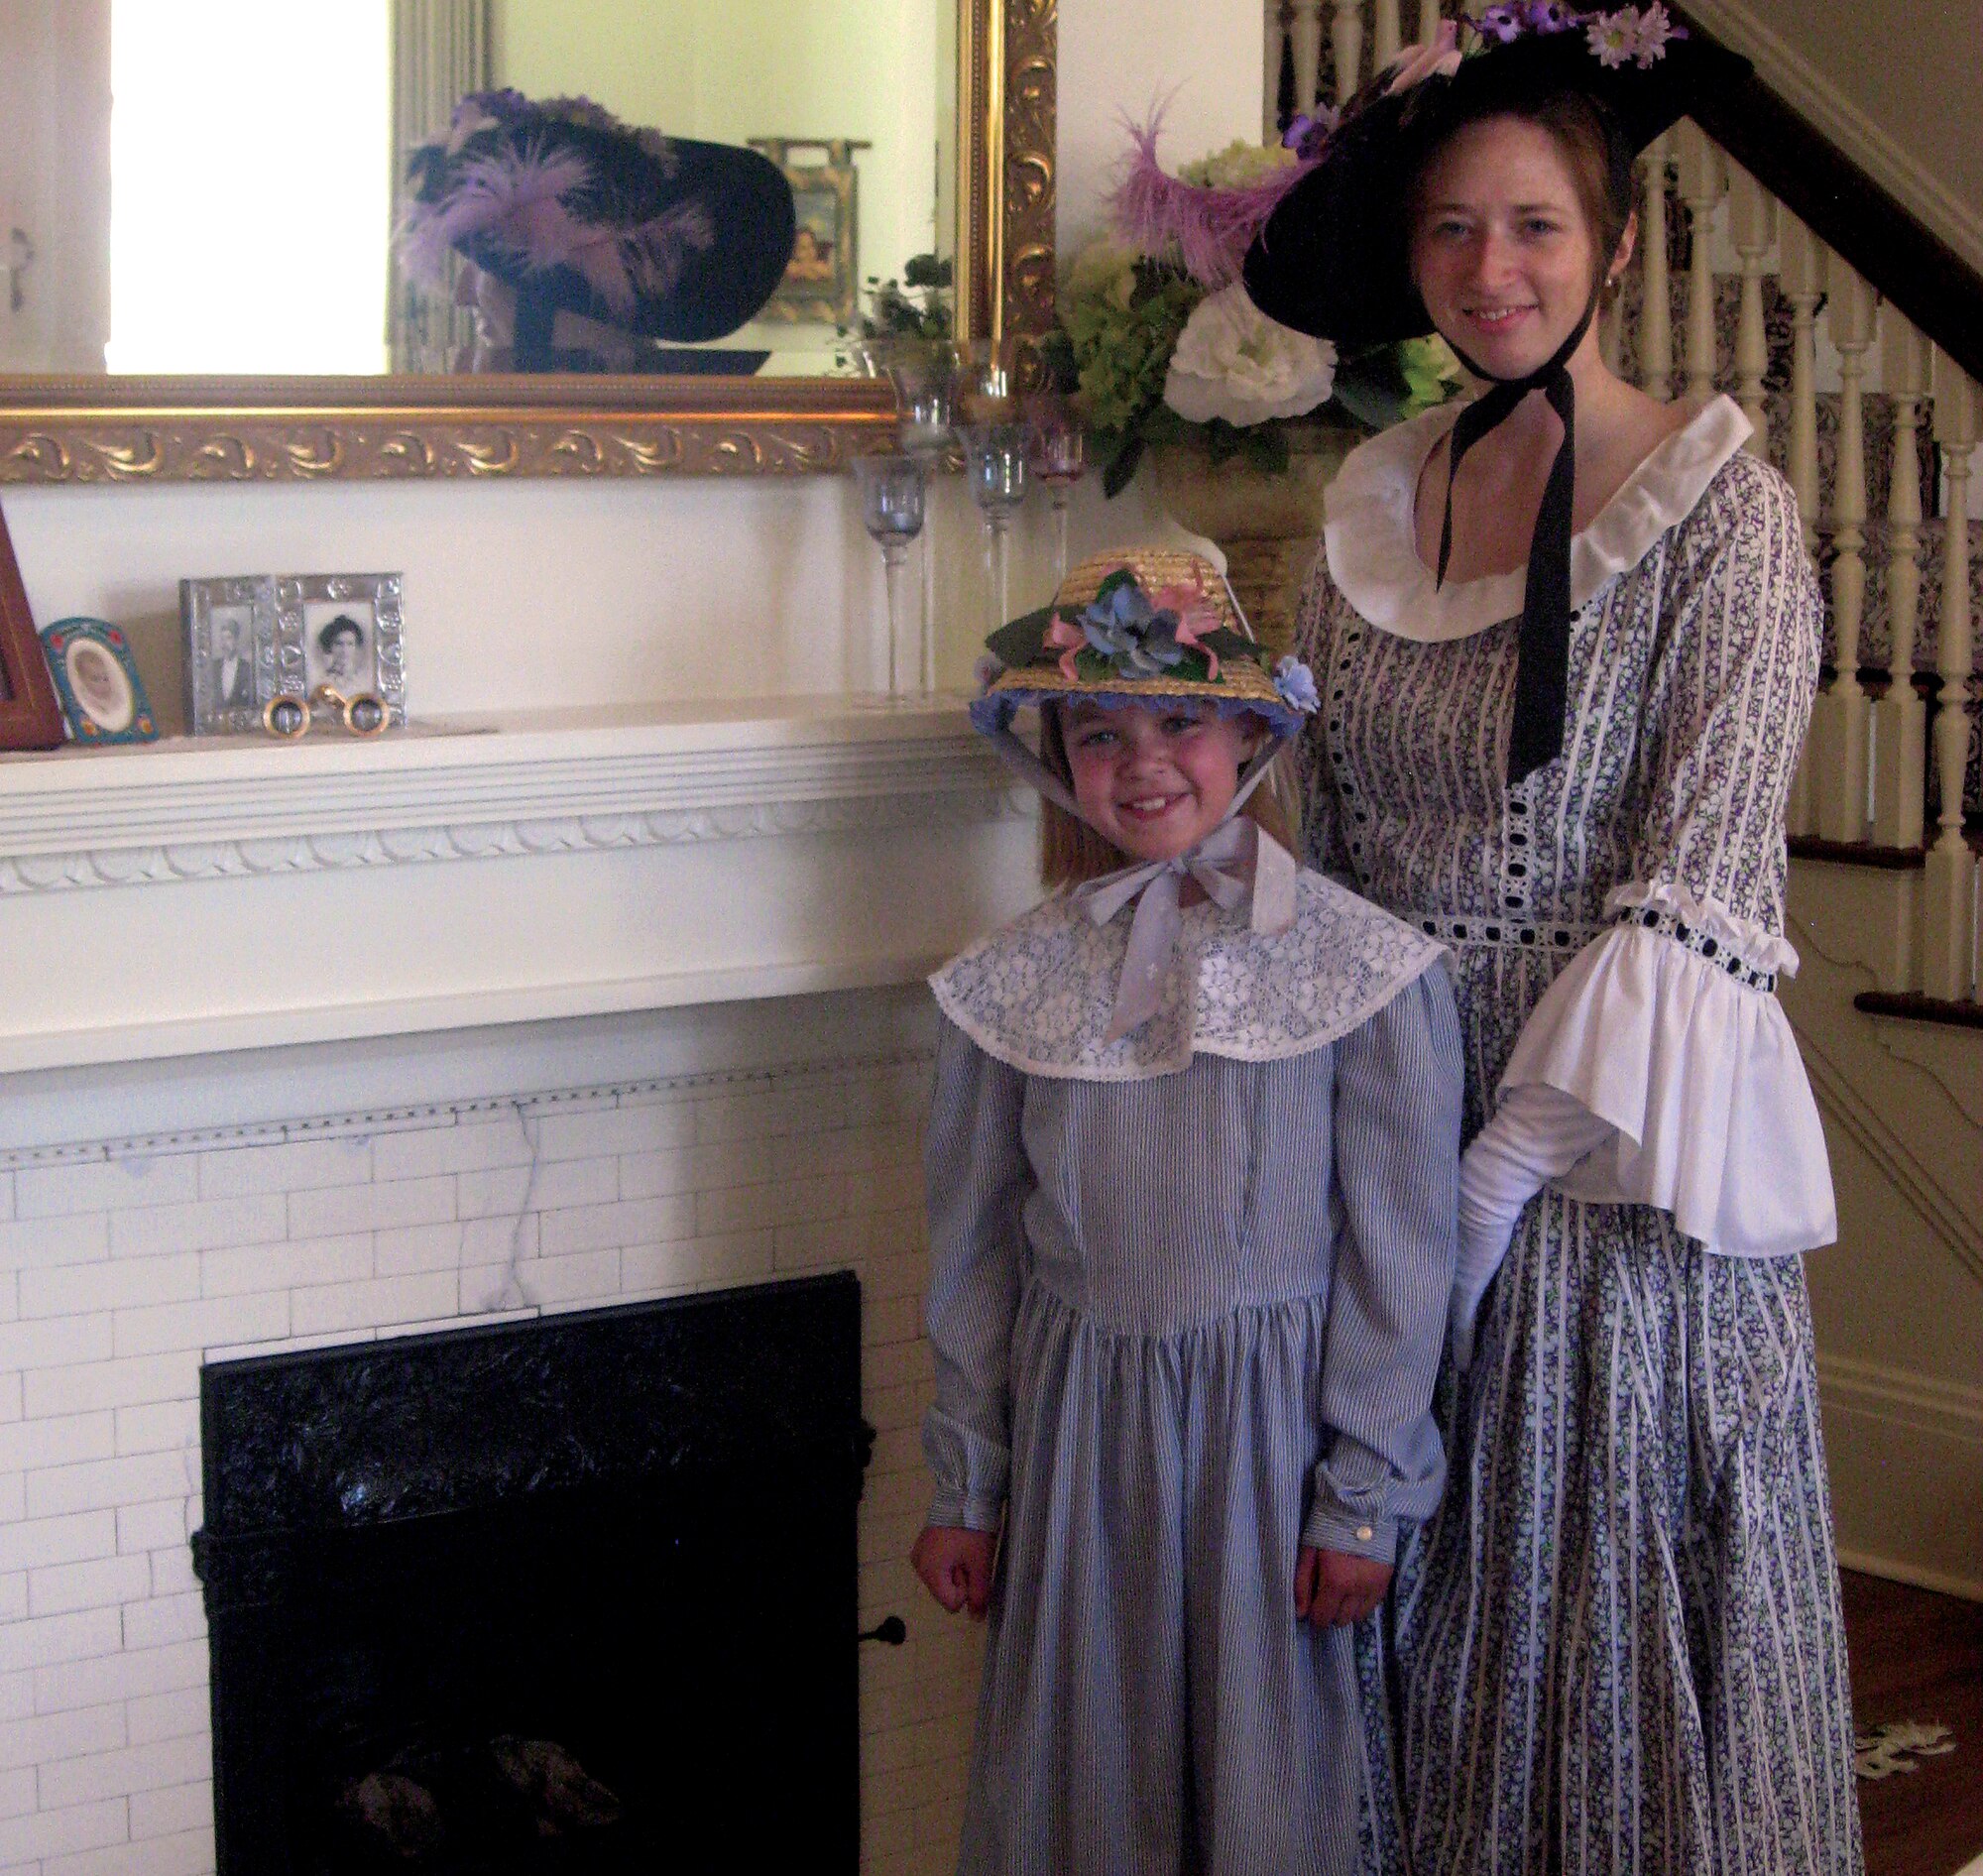 Staff Sgt. Erin Millbaugh, 90th Missile Wing protocol specialist, and Madeline, age 9, daughter of Lt. Col. Matthew Dillow, 321st Missile Squadron commander, dress up and show off the home of Maj. Gen. C. Donald Alston, 20th Air Force commander, during the Historic Homes Tour July 24. (U.S. Air Force photo by Blaze Lipowski)